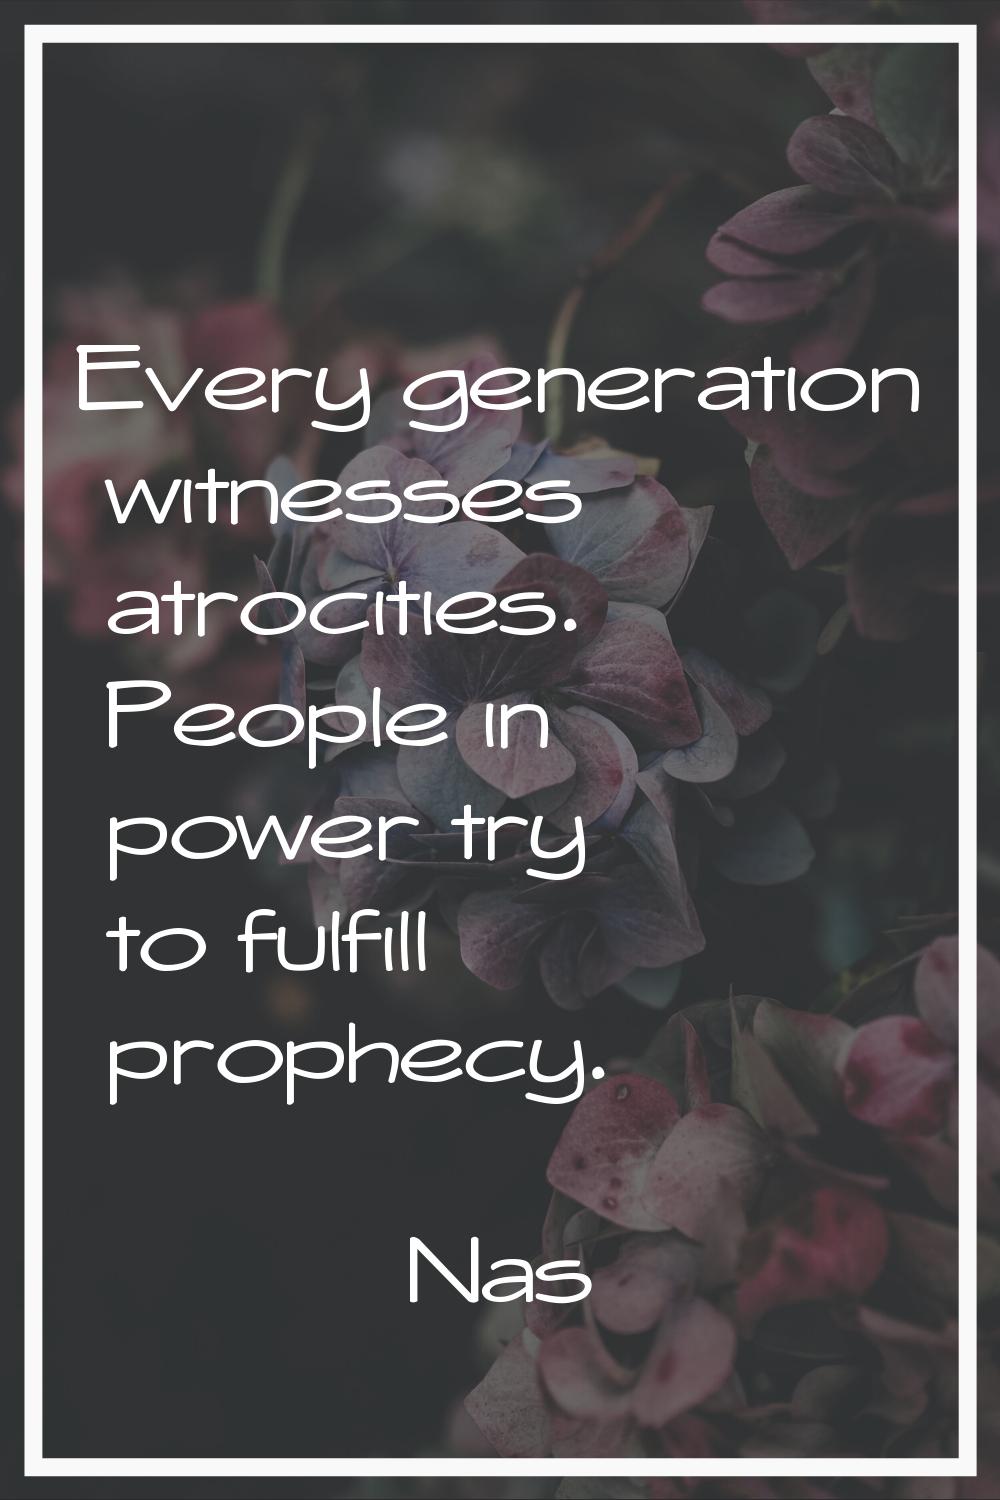 Every generation witnesses atrocities. People in power try to fulfill prophecy.